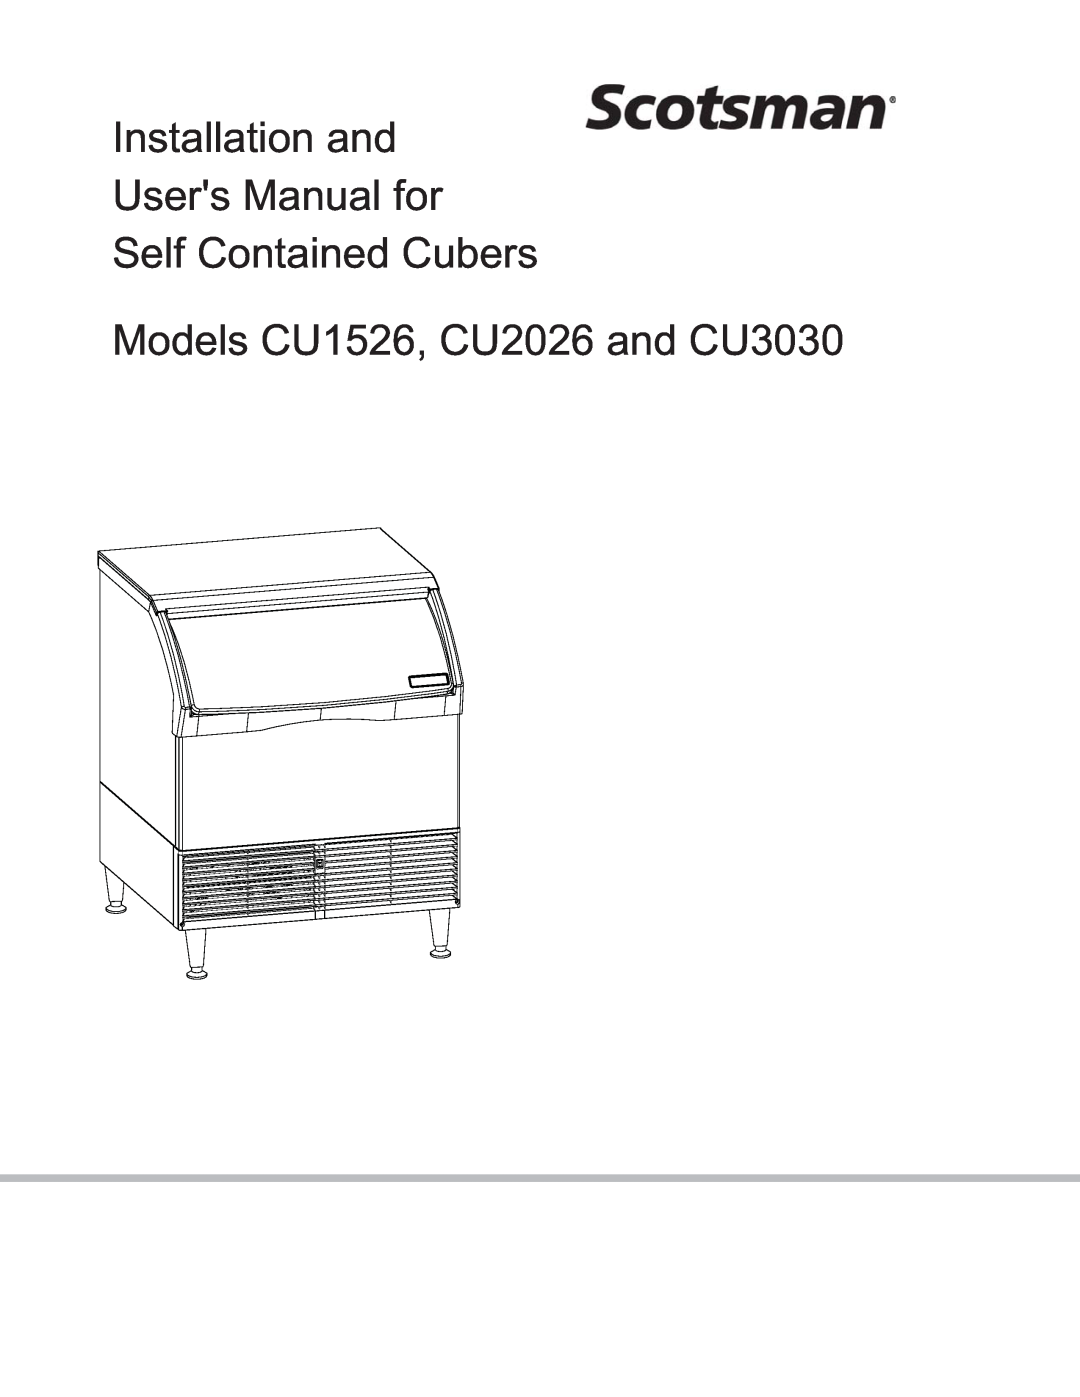 Scotsman Ice user manual Installation and Users Manual for Self Contained Cubers, Models CU1526, CU2026 and CU3030 